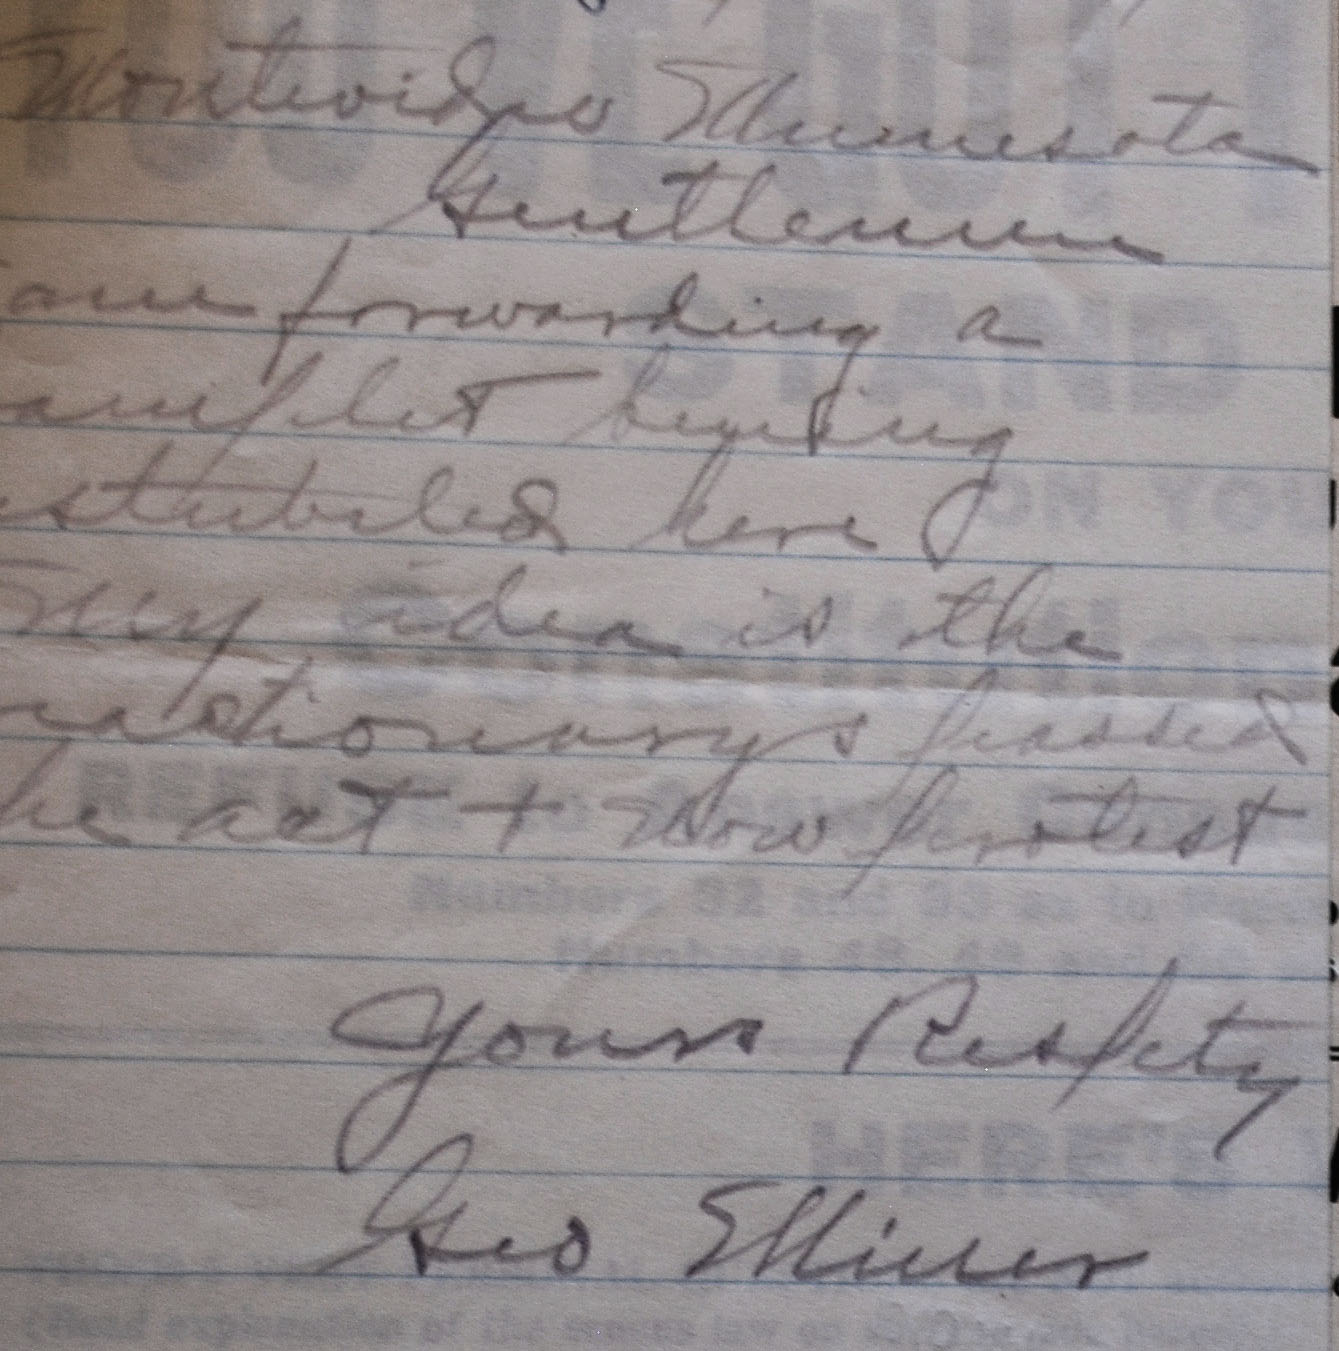 handwritten note signed by George Miner